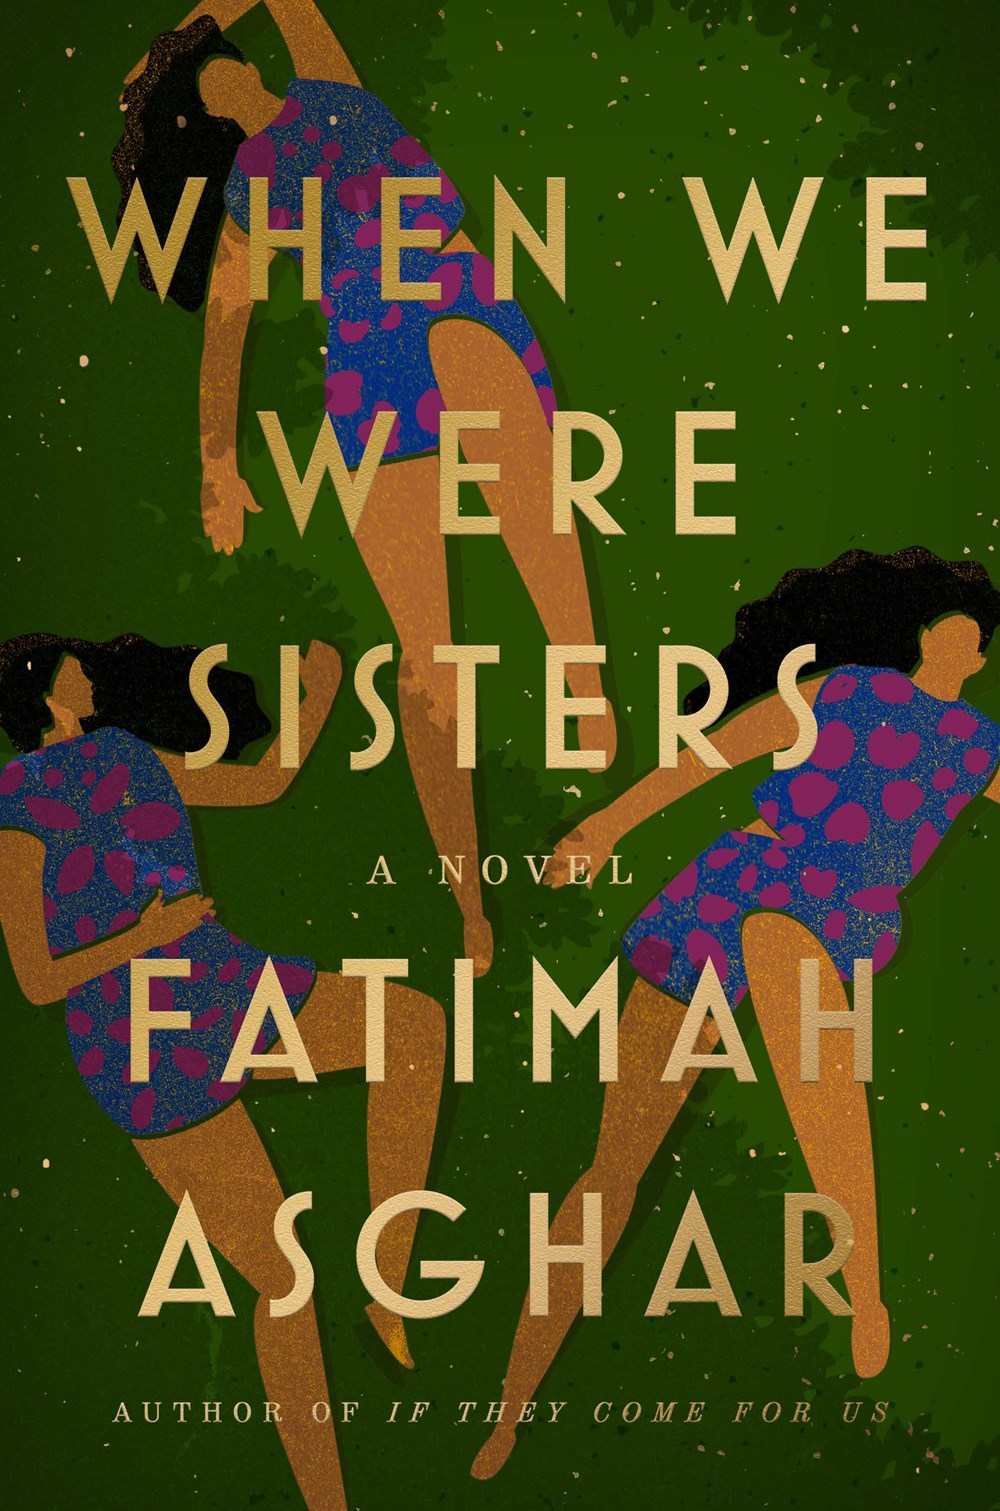 When We Were Sisters: A Novel by Fatimah Asghar